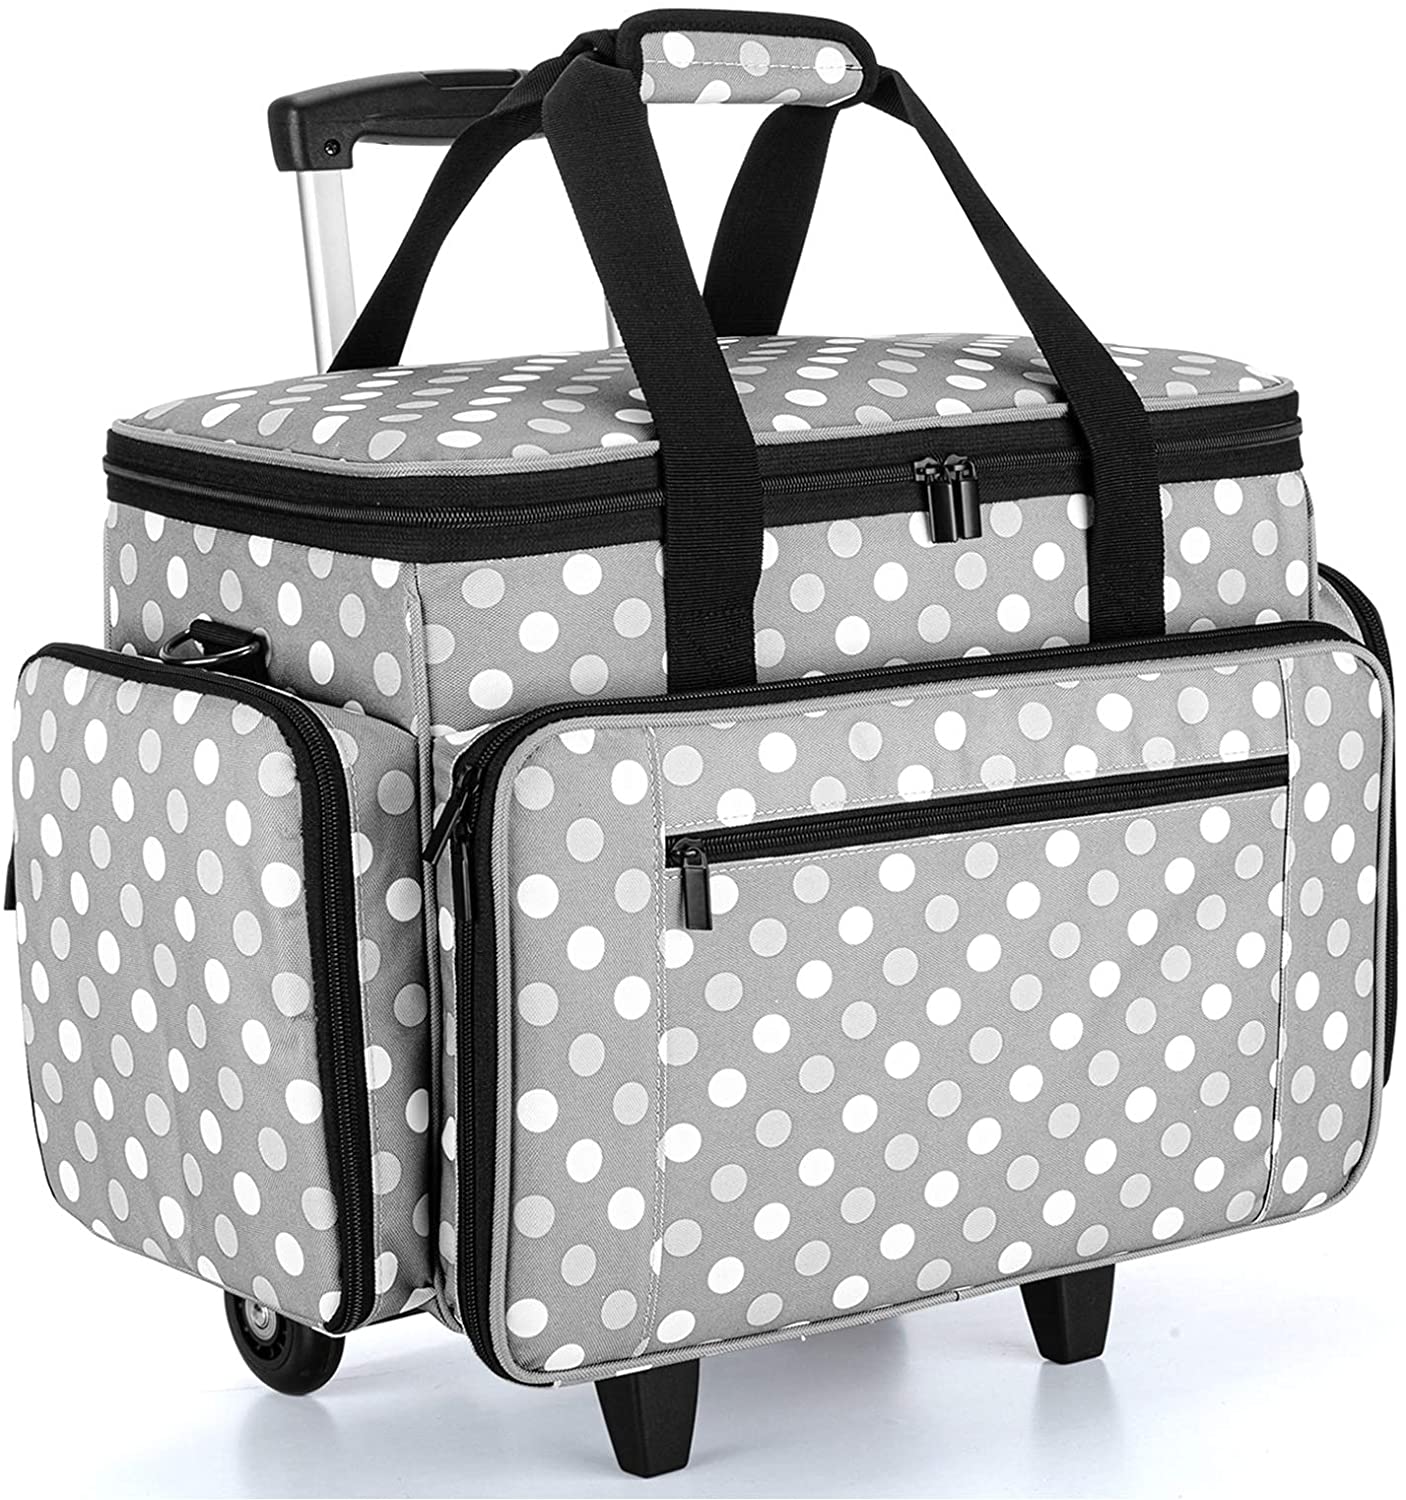 Sewing Machine Bag,Sewing Machine Trolley Bag,Portable Sewing Padded Storage Tote for Most Standard Sewing Machines and Accessories,43x30.5x19cm Only Storage Bag 